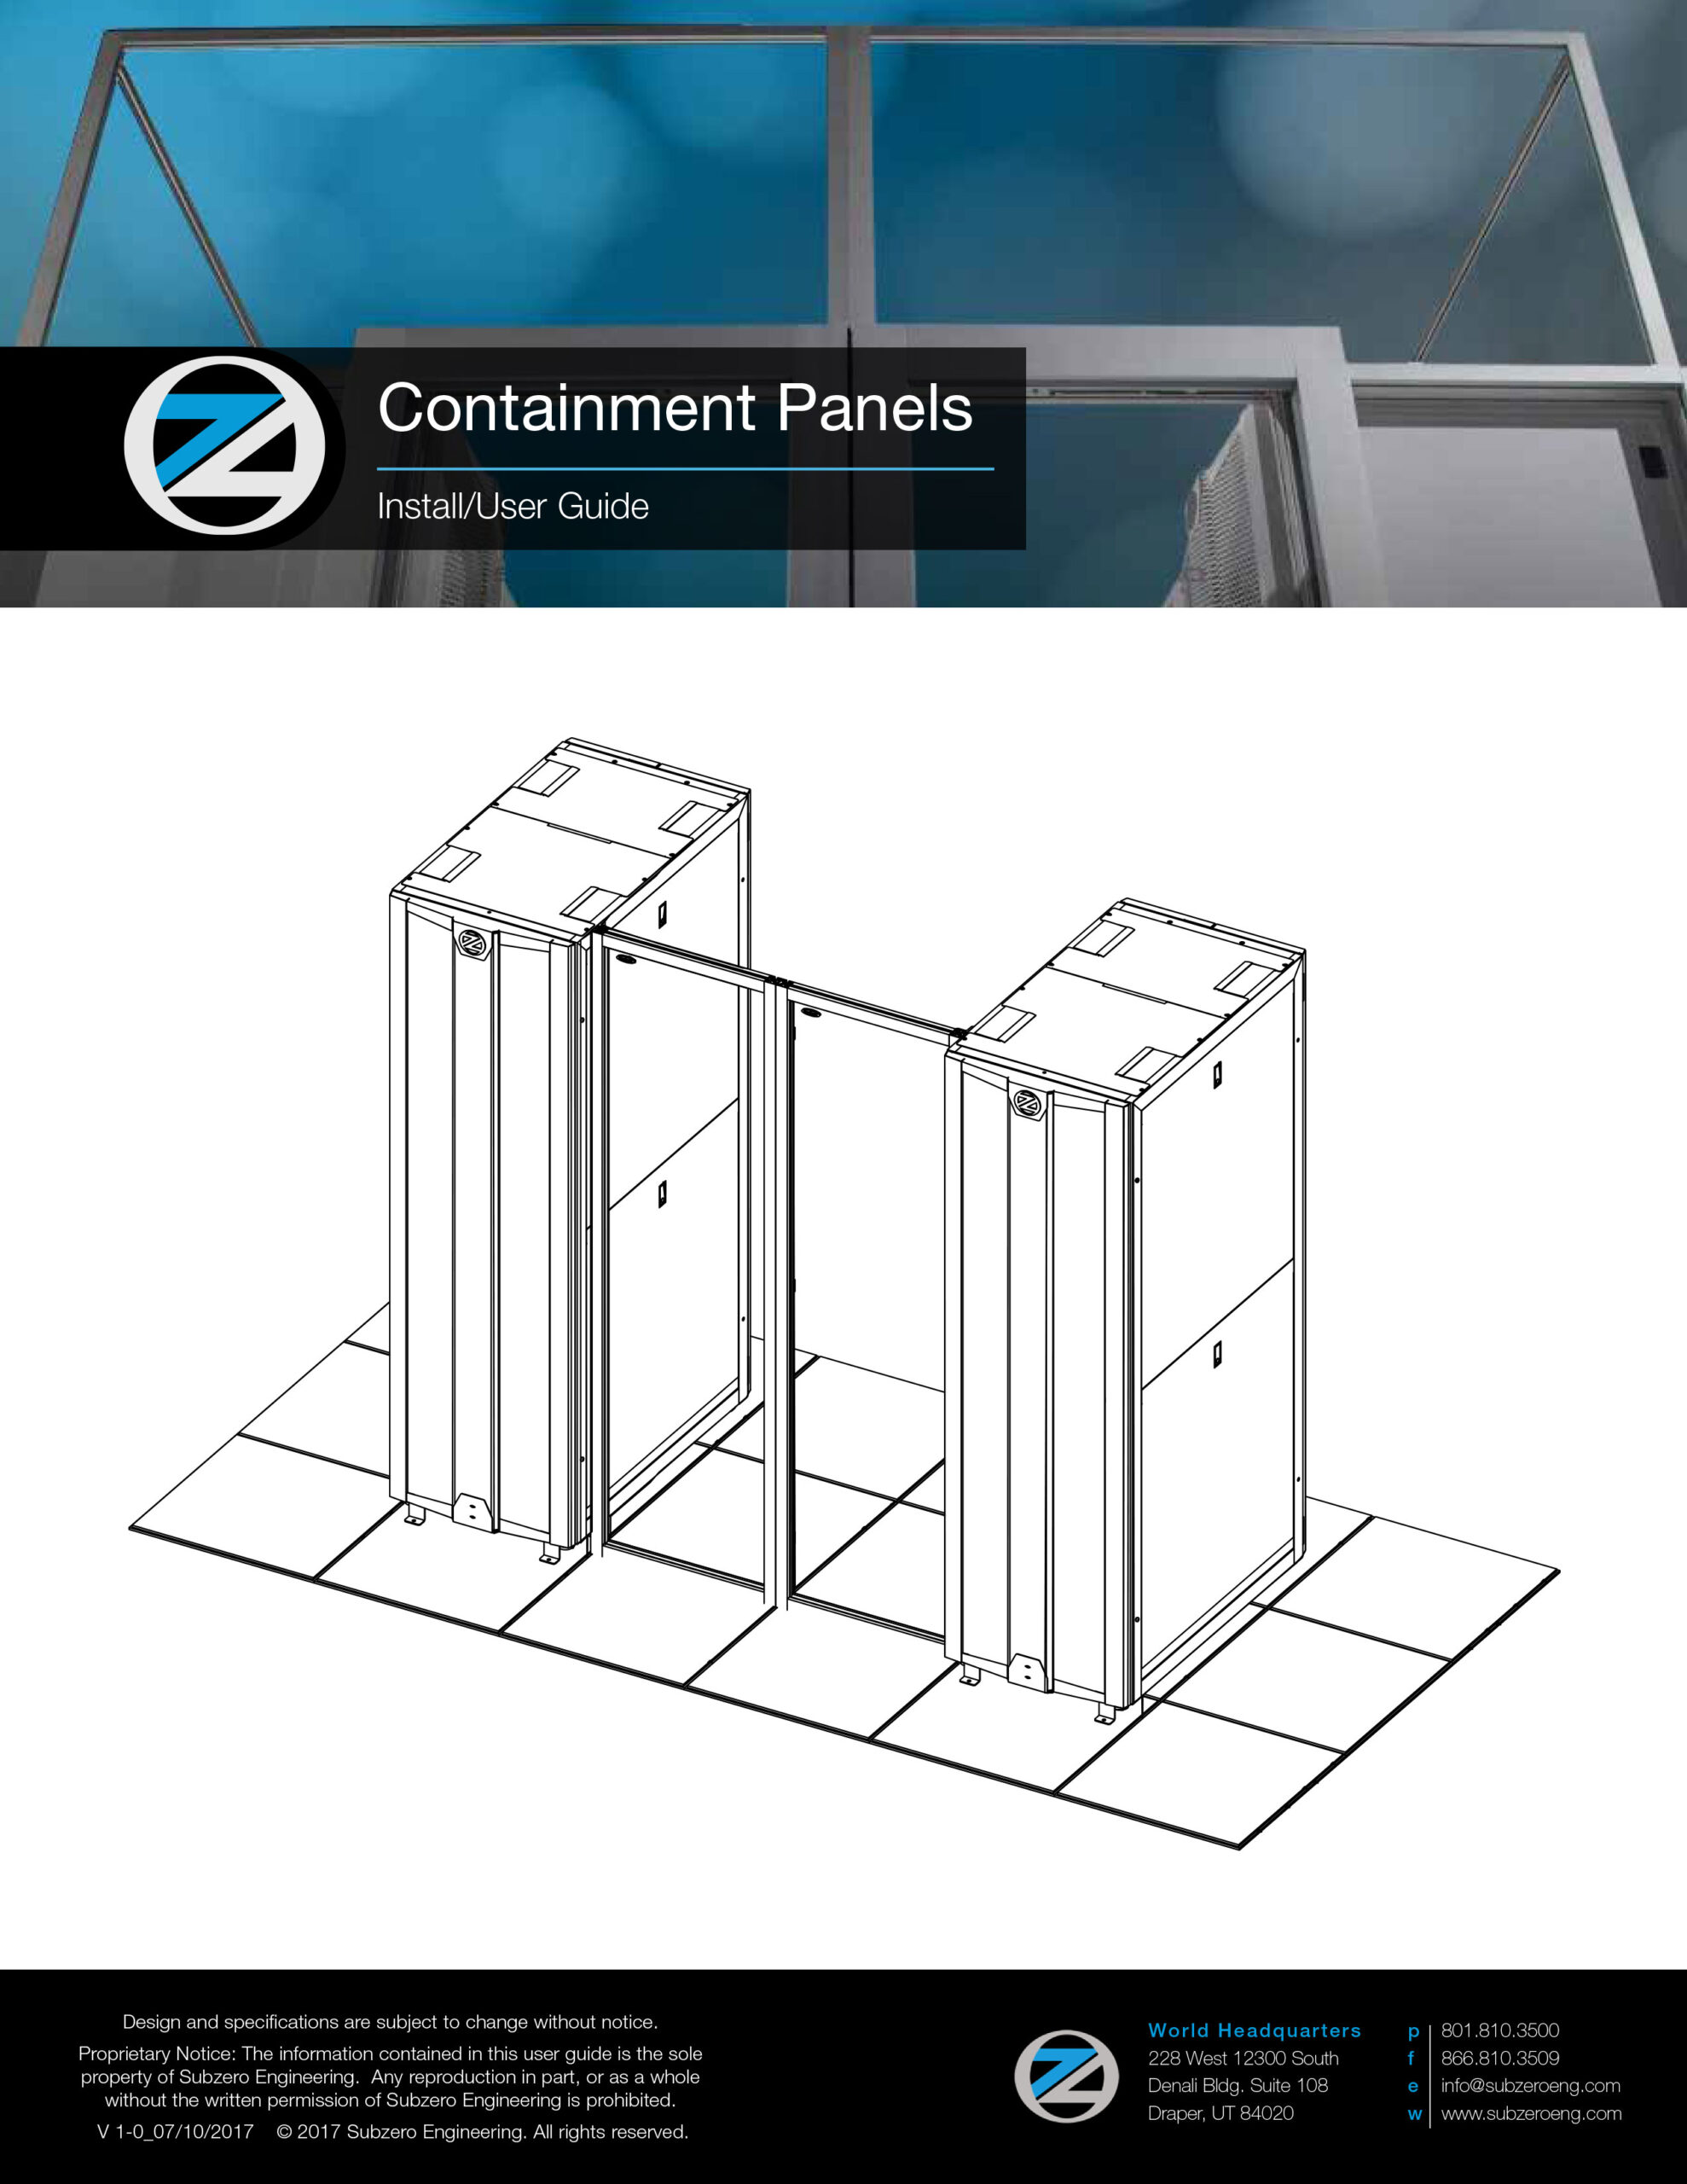 Containment Panels for Clean Room Enclosures | Subzero Engineering